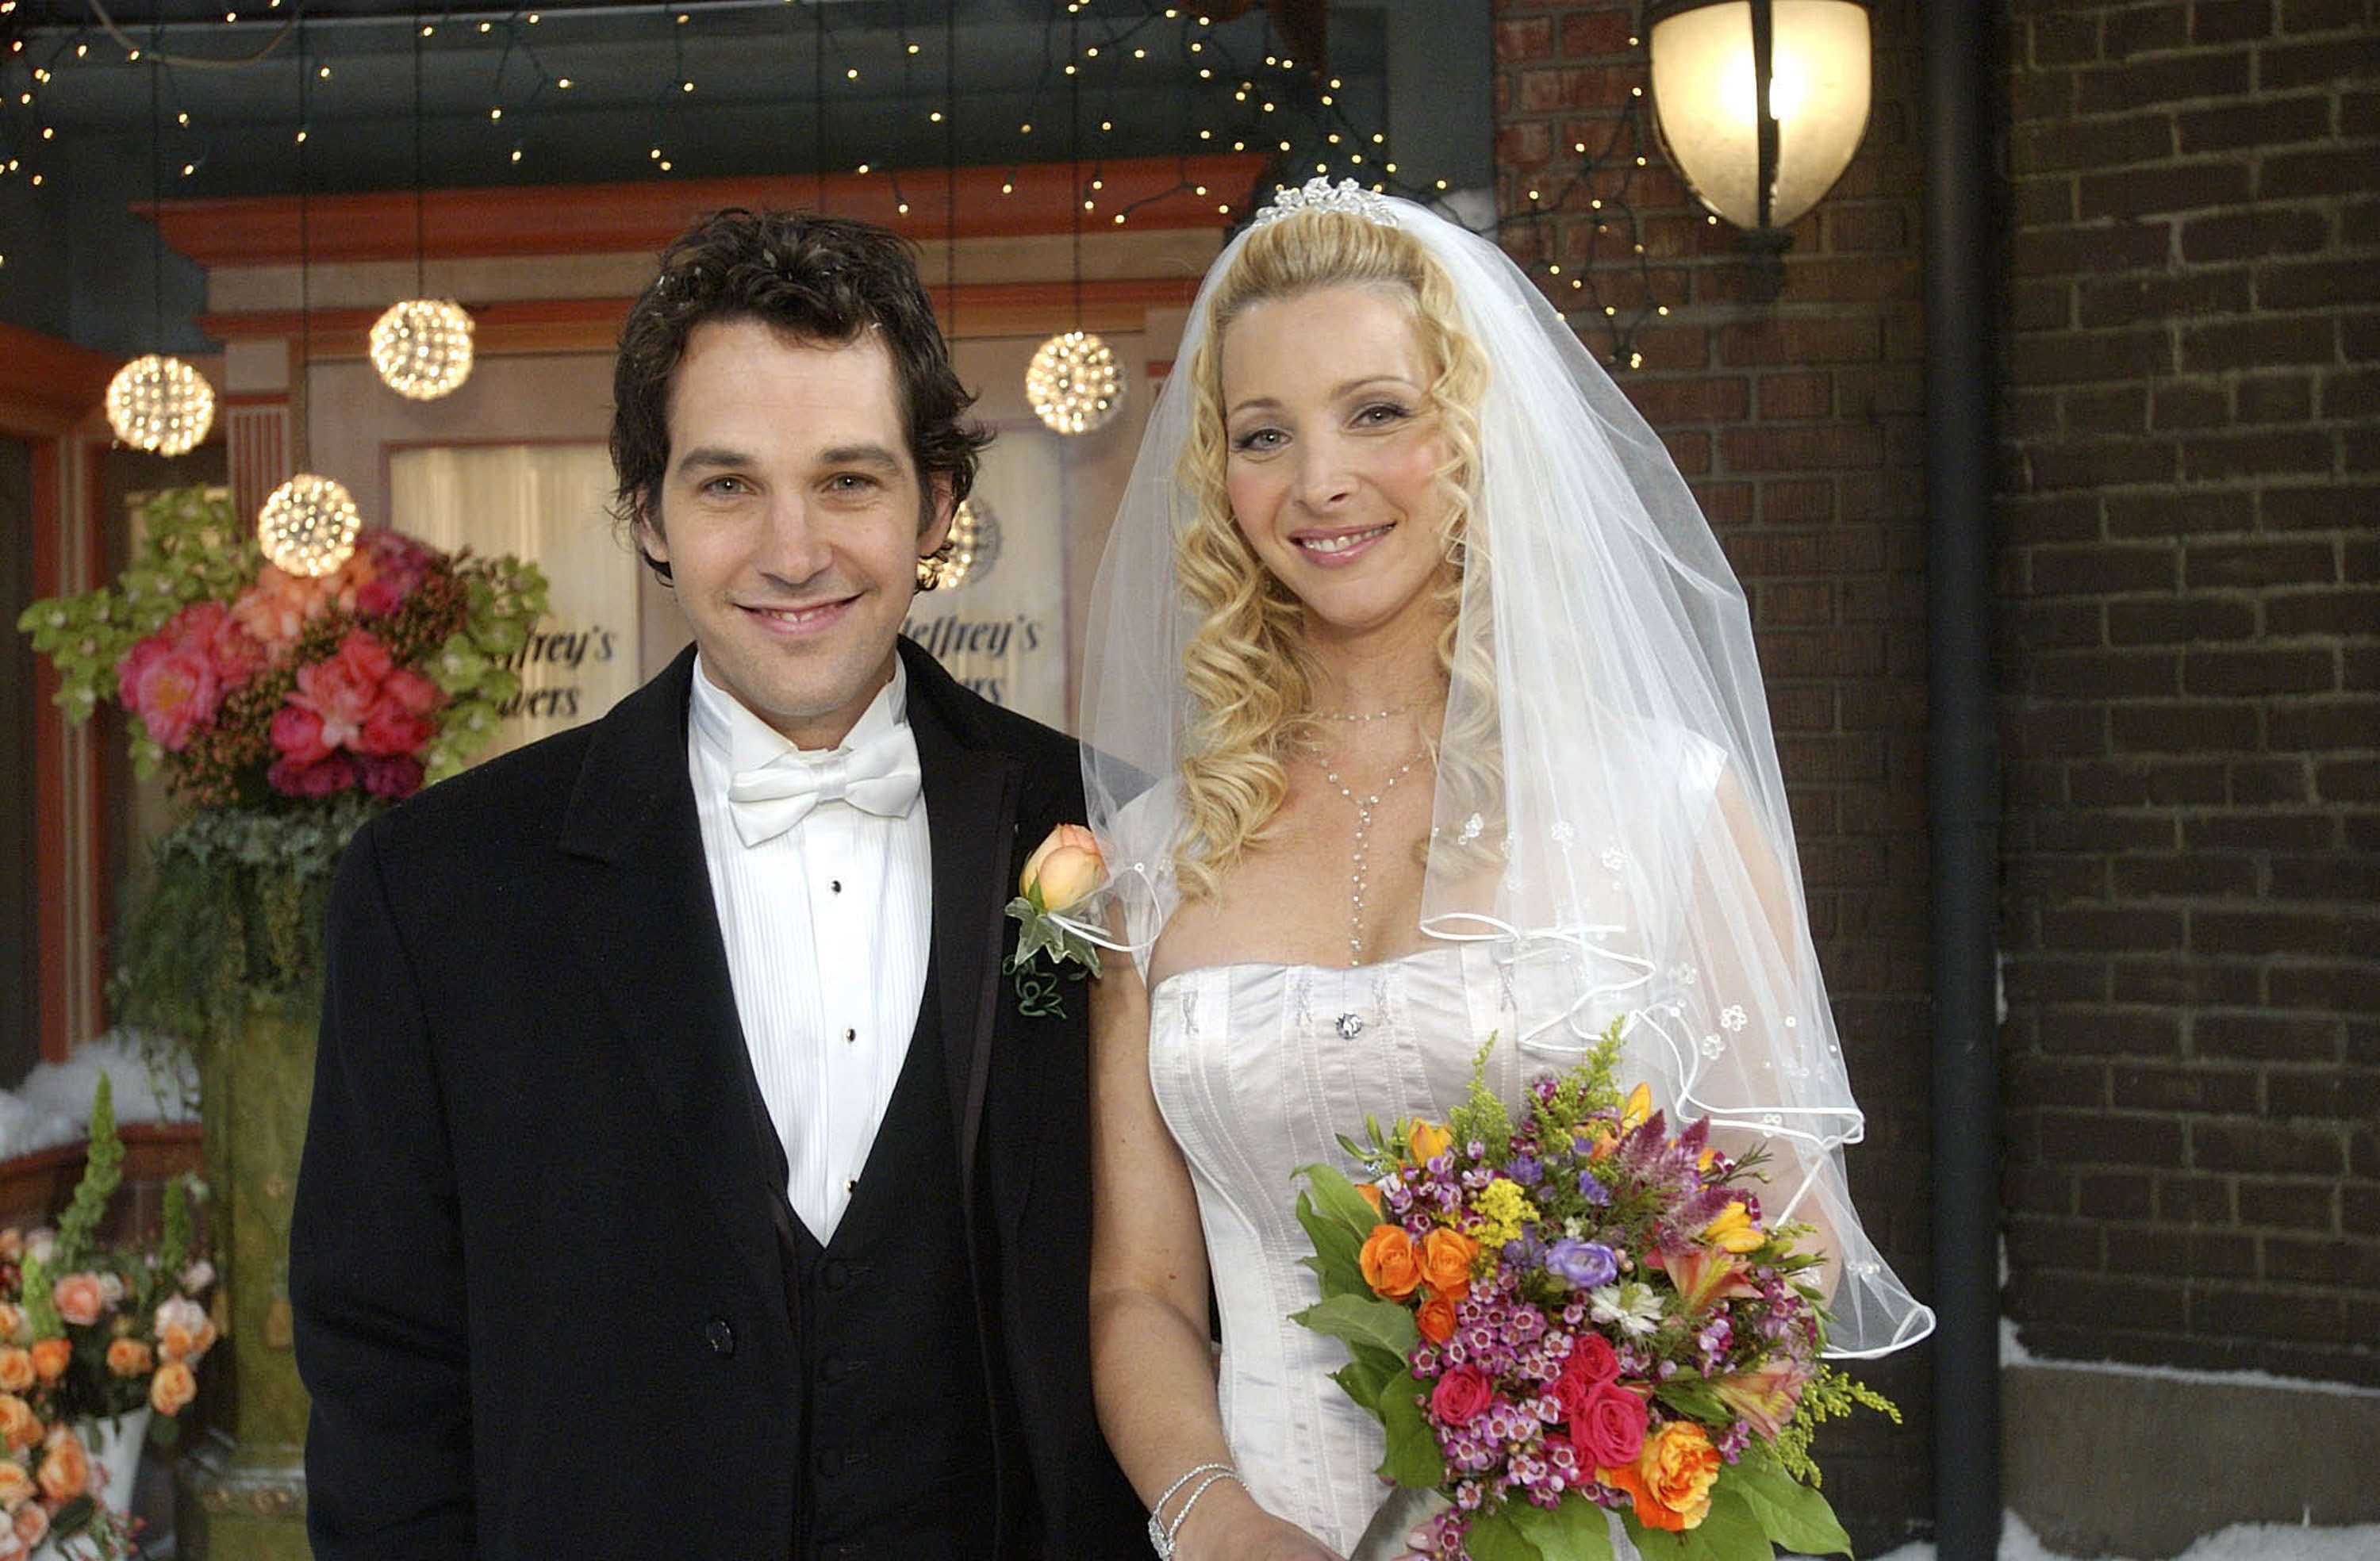 Paul Rudd as Mike Hannigan and Lisa Kudrow as Phoebe Buffay in the 1994 sitcom "Friends." | Source: Getty Images